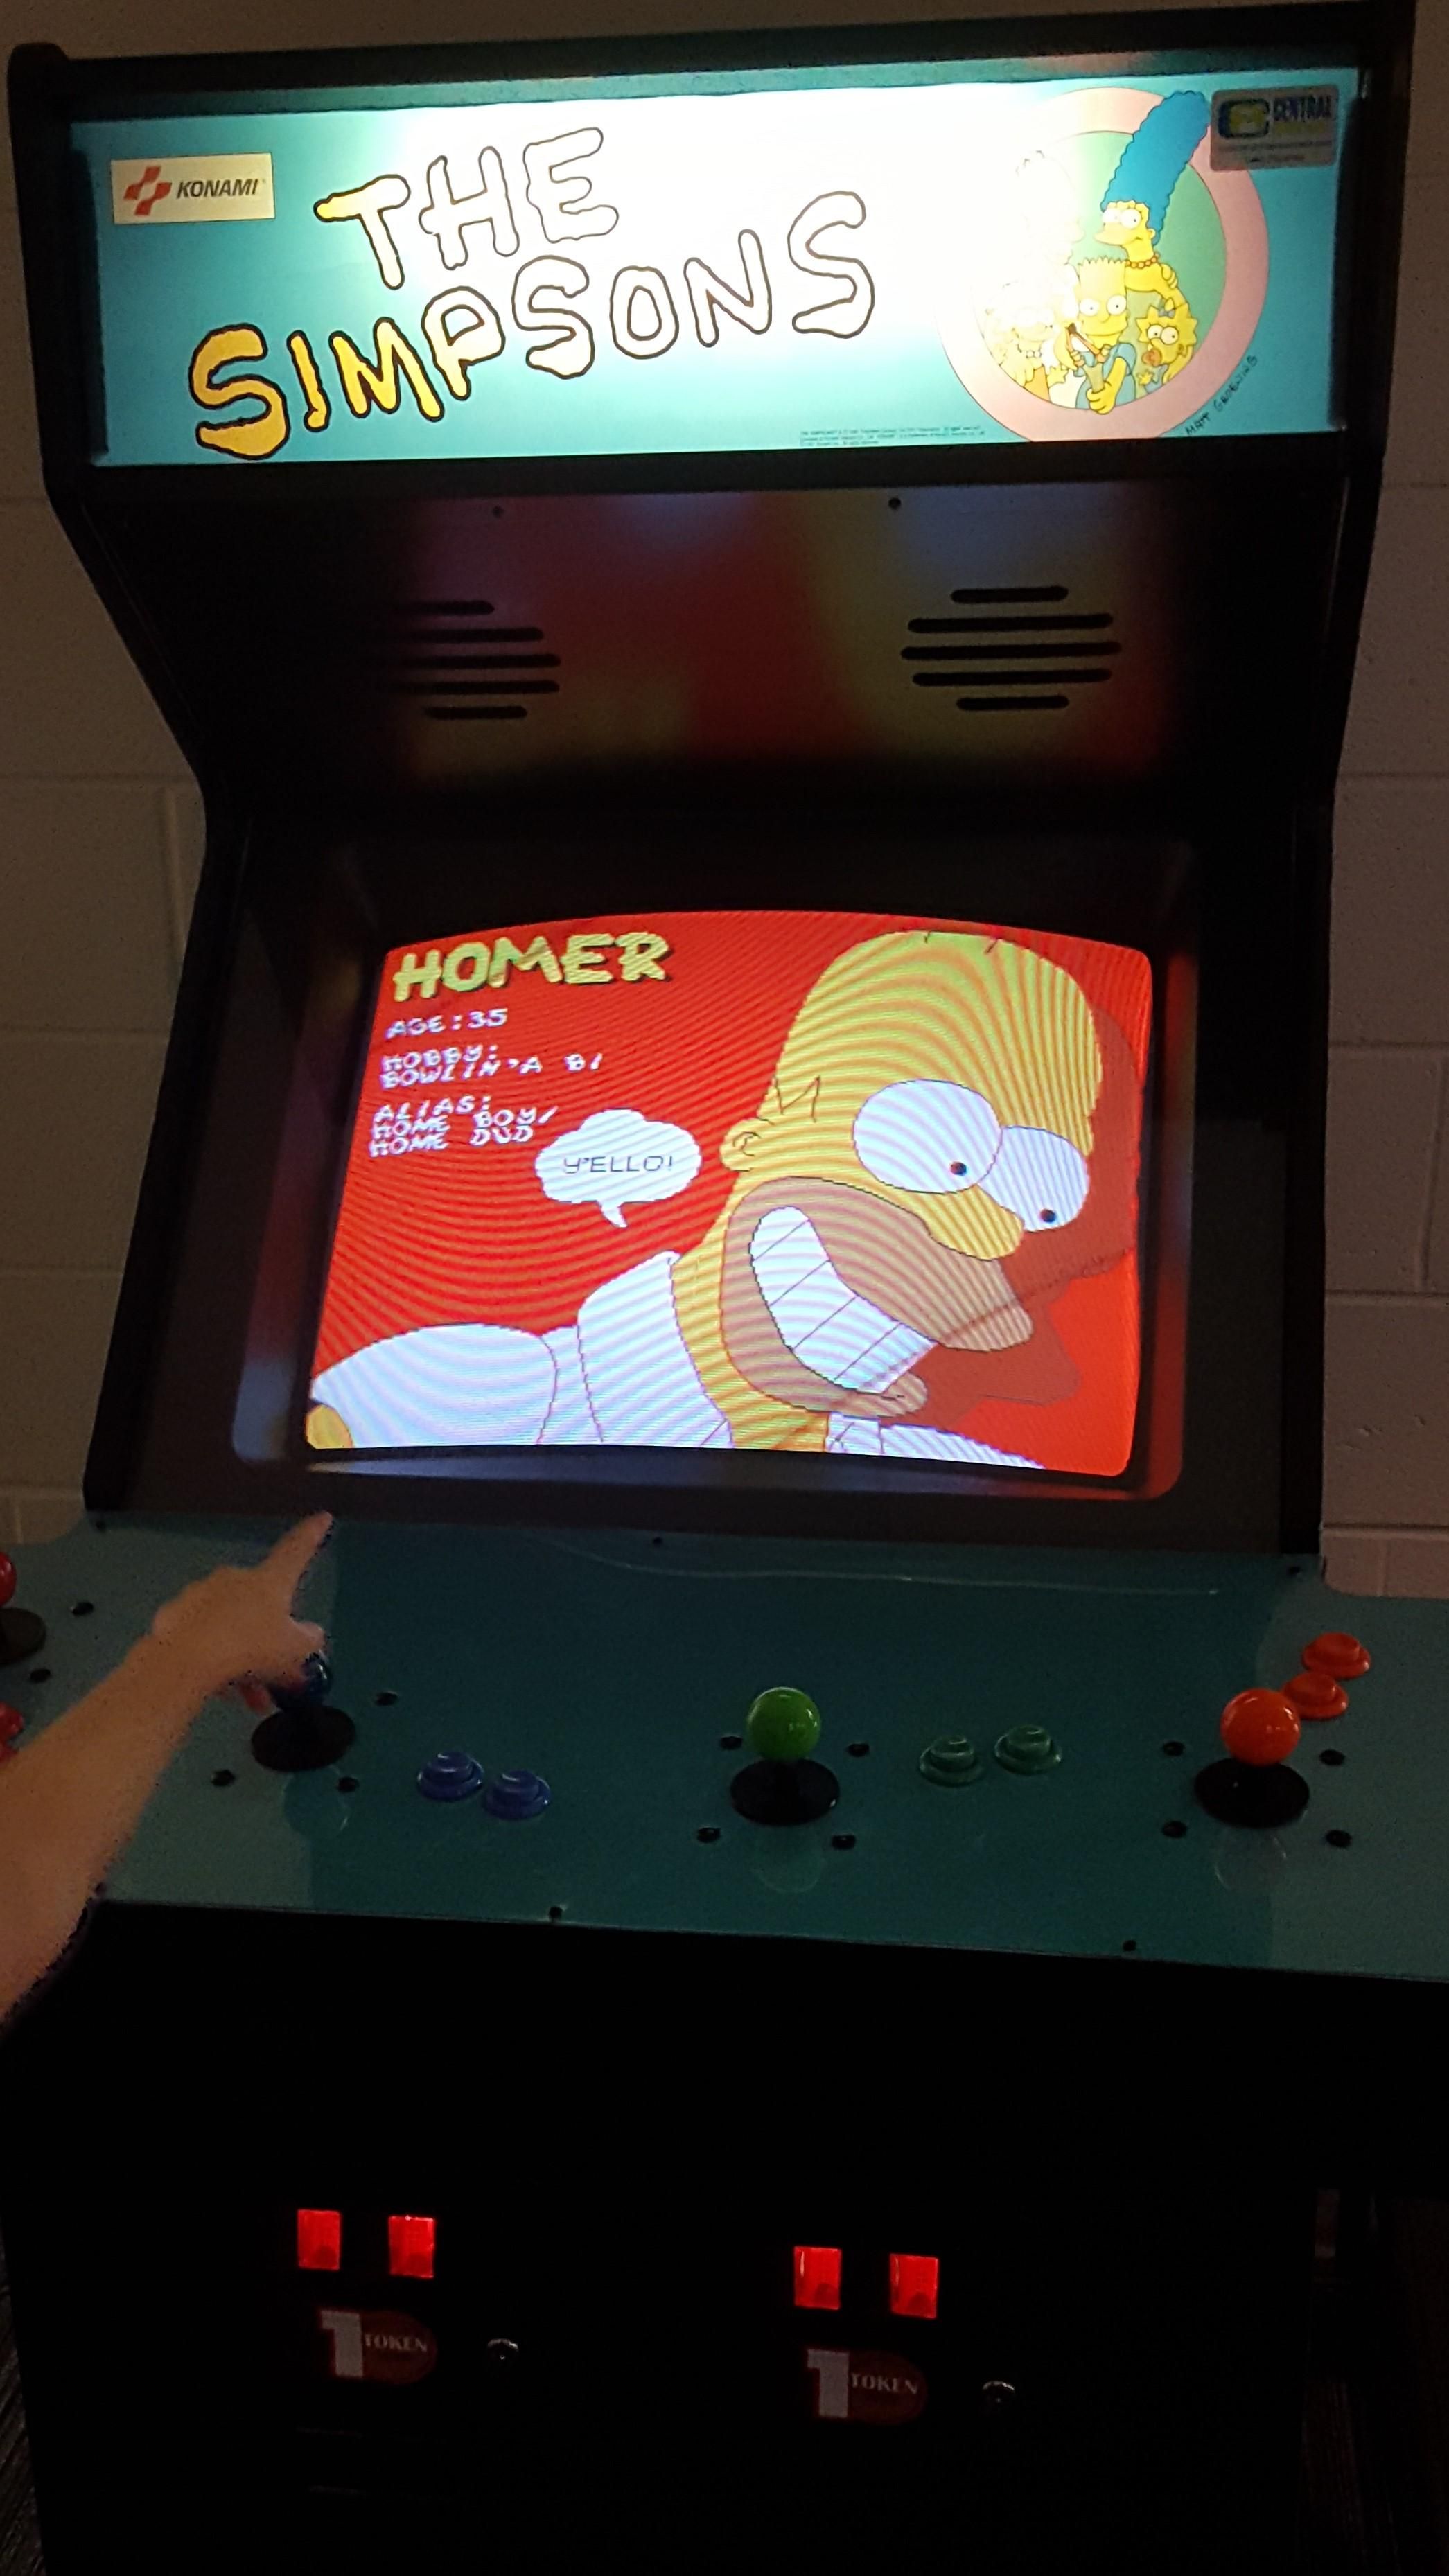 My local bowling lanes just brought in some arcades, which includes this coin eater.